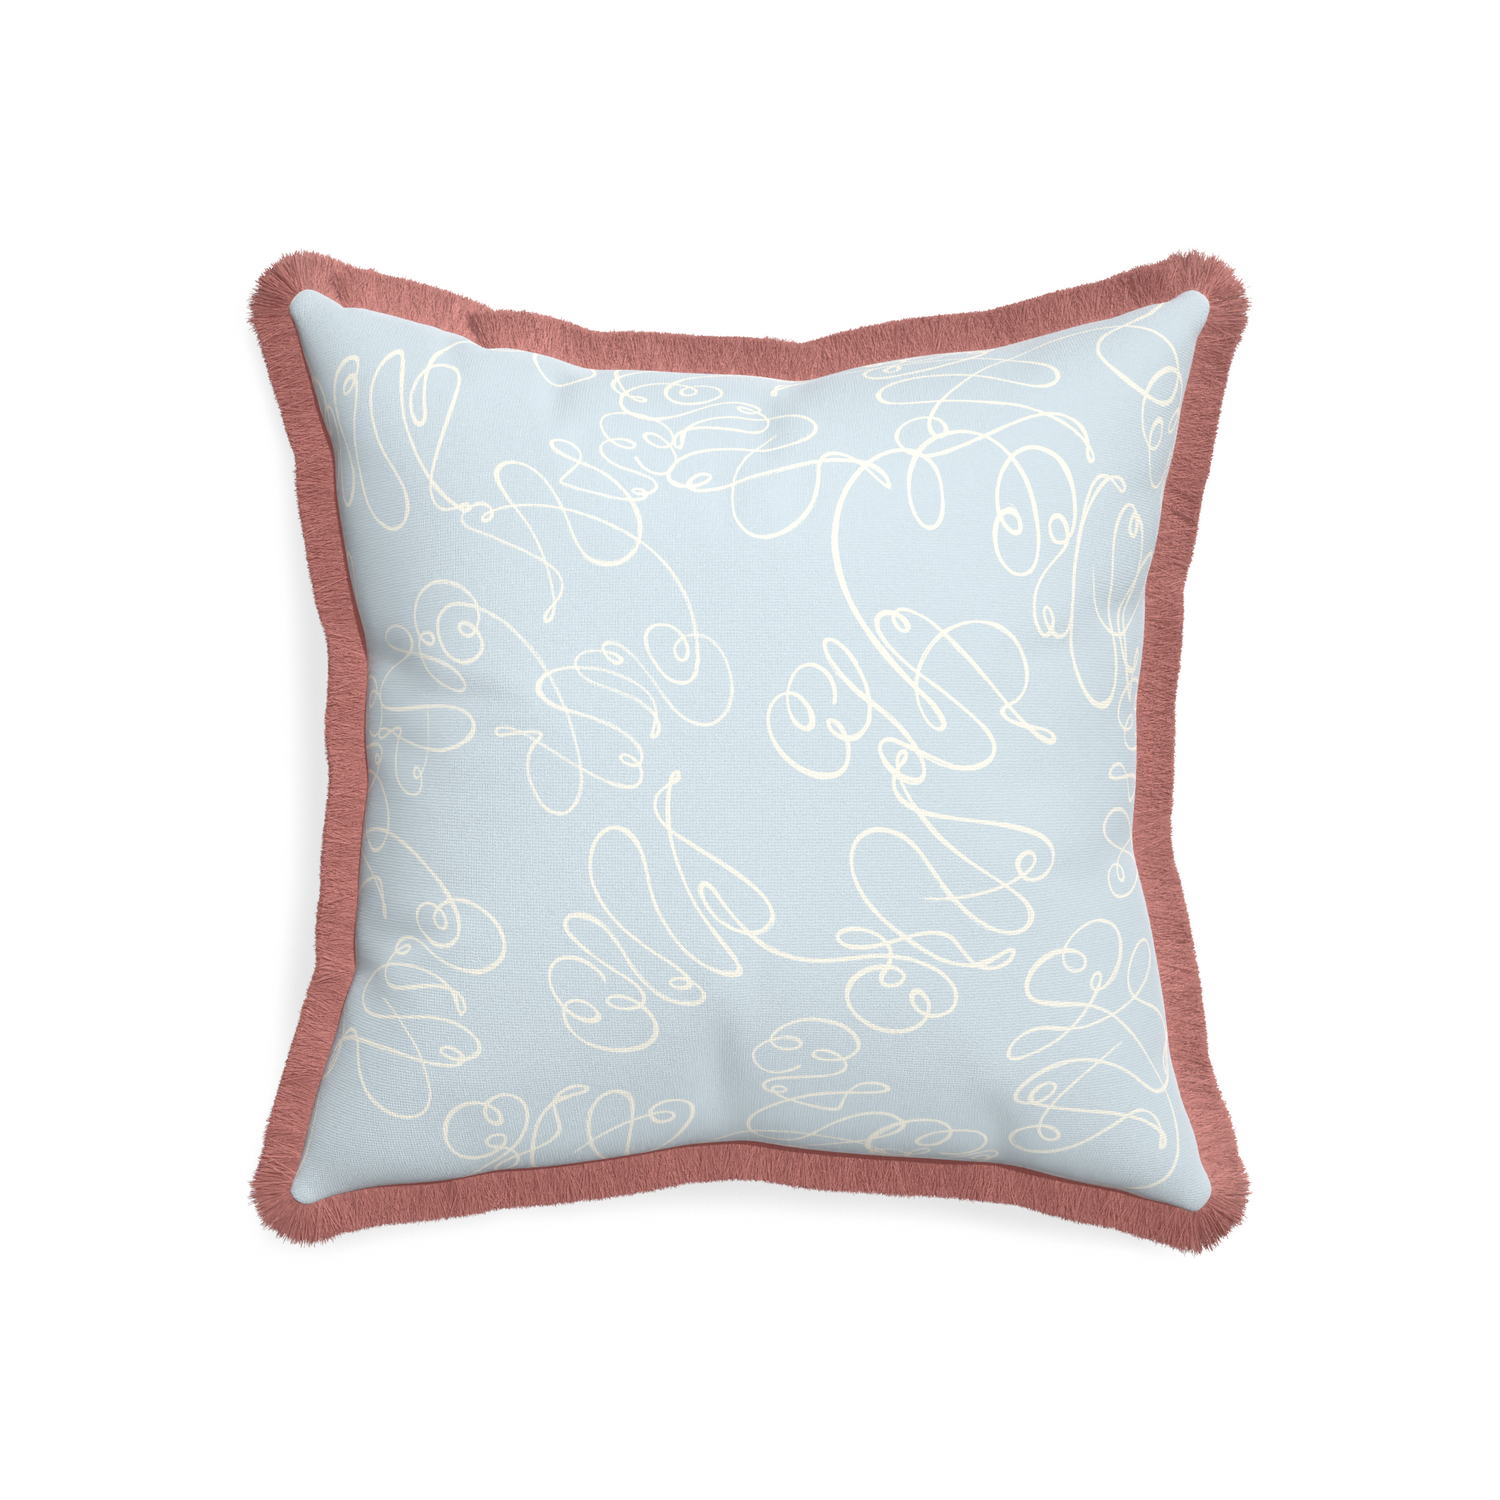 20-square mirabella custom pillow with d fringe on white background